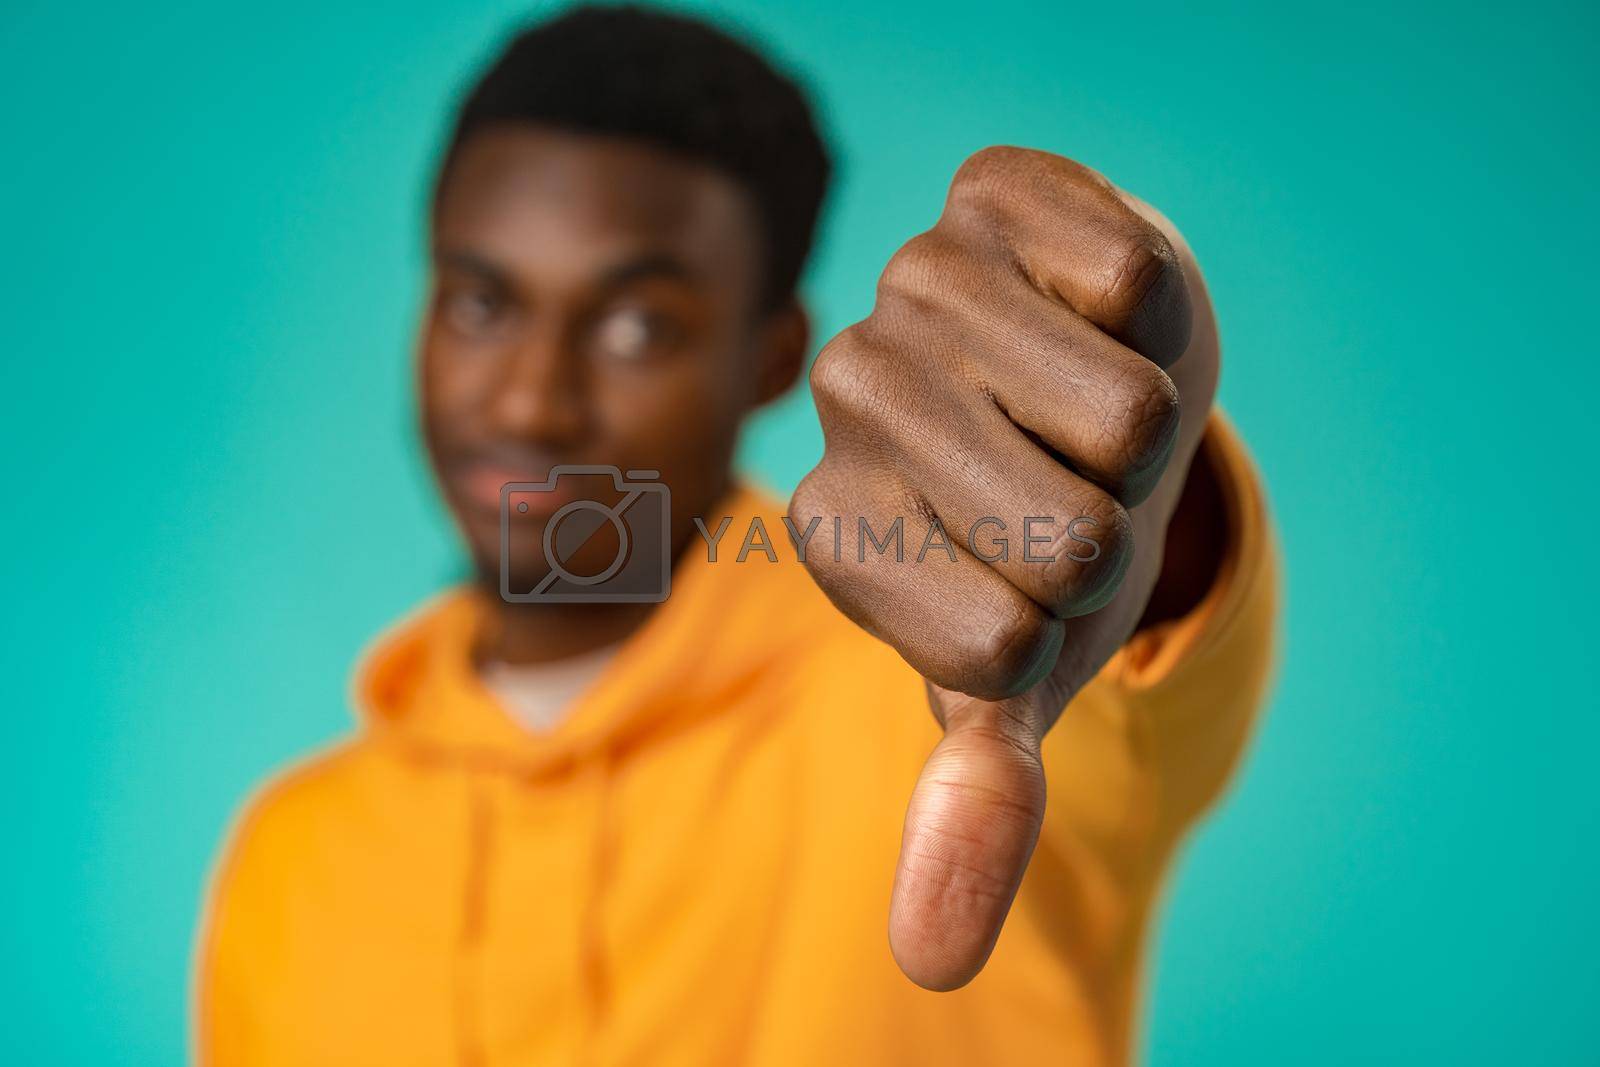 Royalty free image of Dissatisfied african american man show thumb down sign in studio by Fabrikasimf